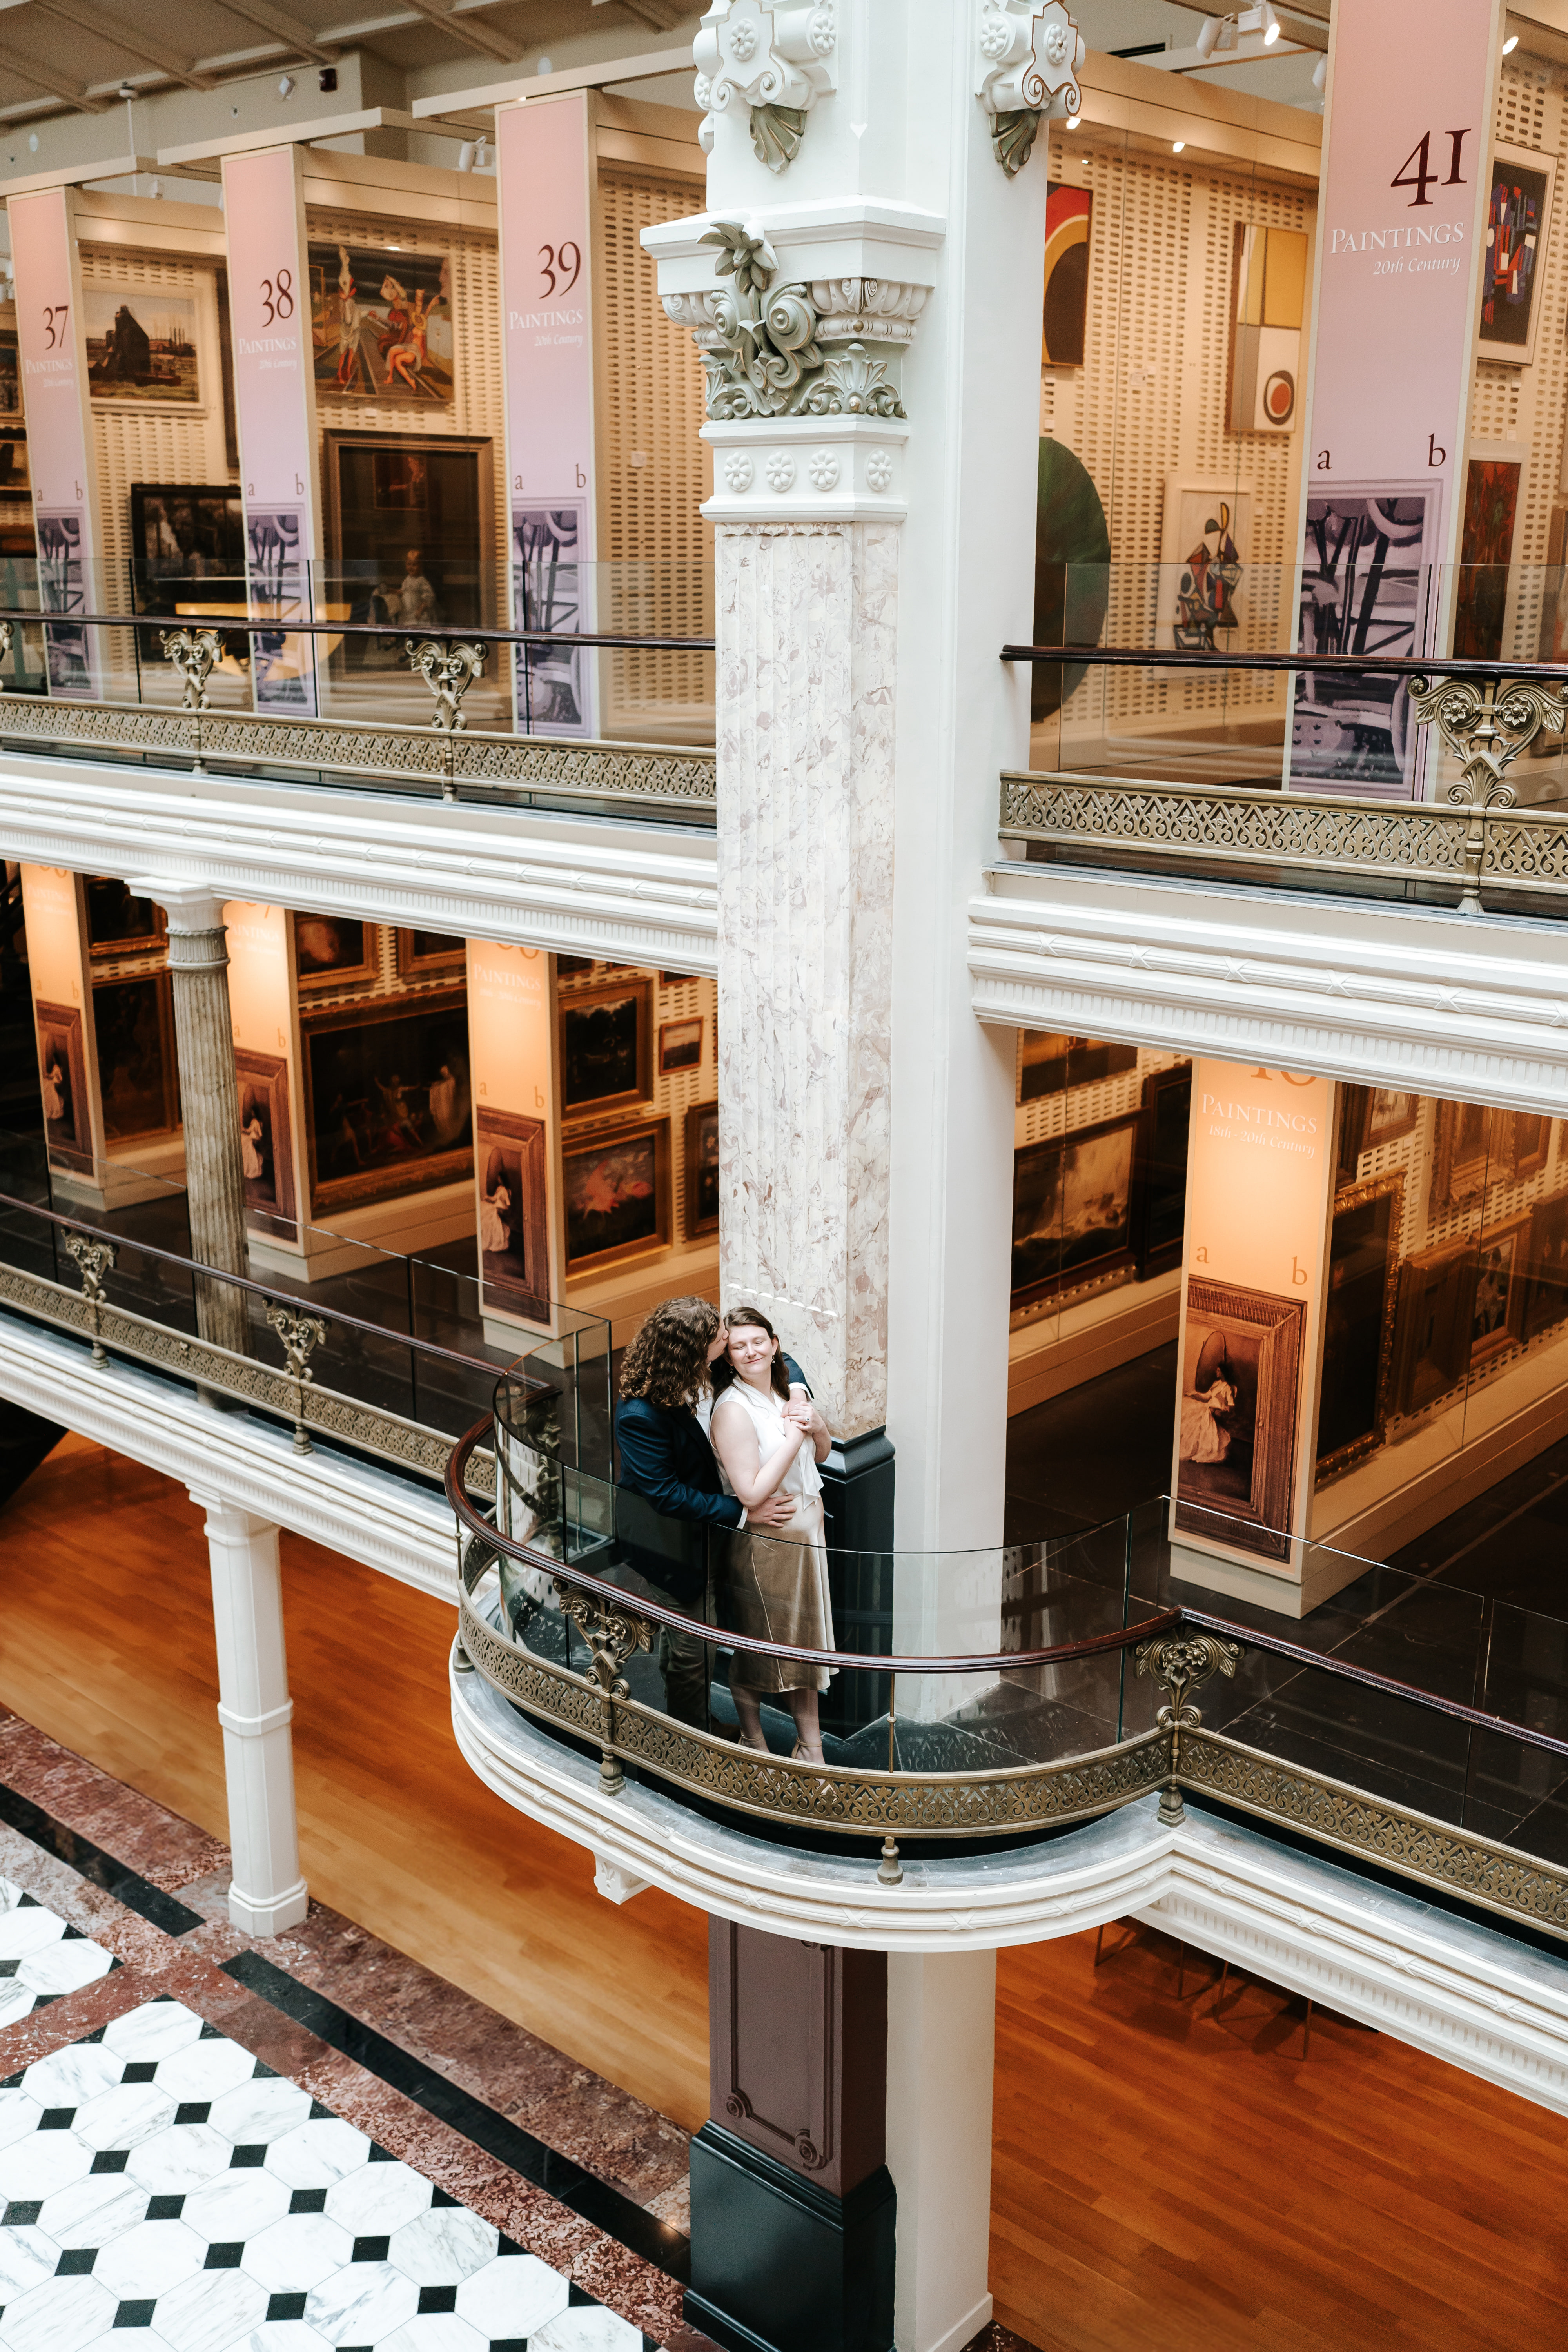 Spring Luce Foundation Center Portrait Gallery Engagement Session District of Columbia Wedding Photographer